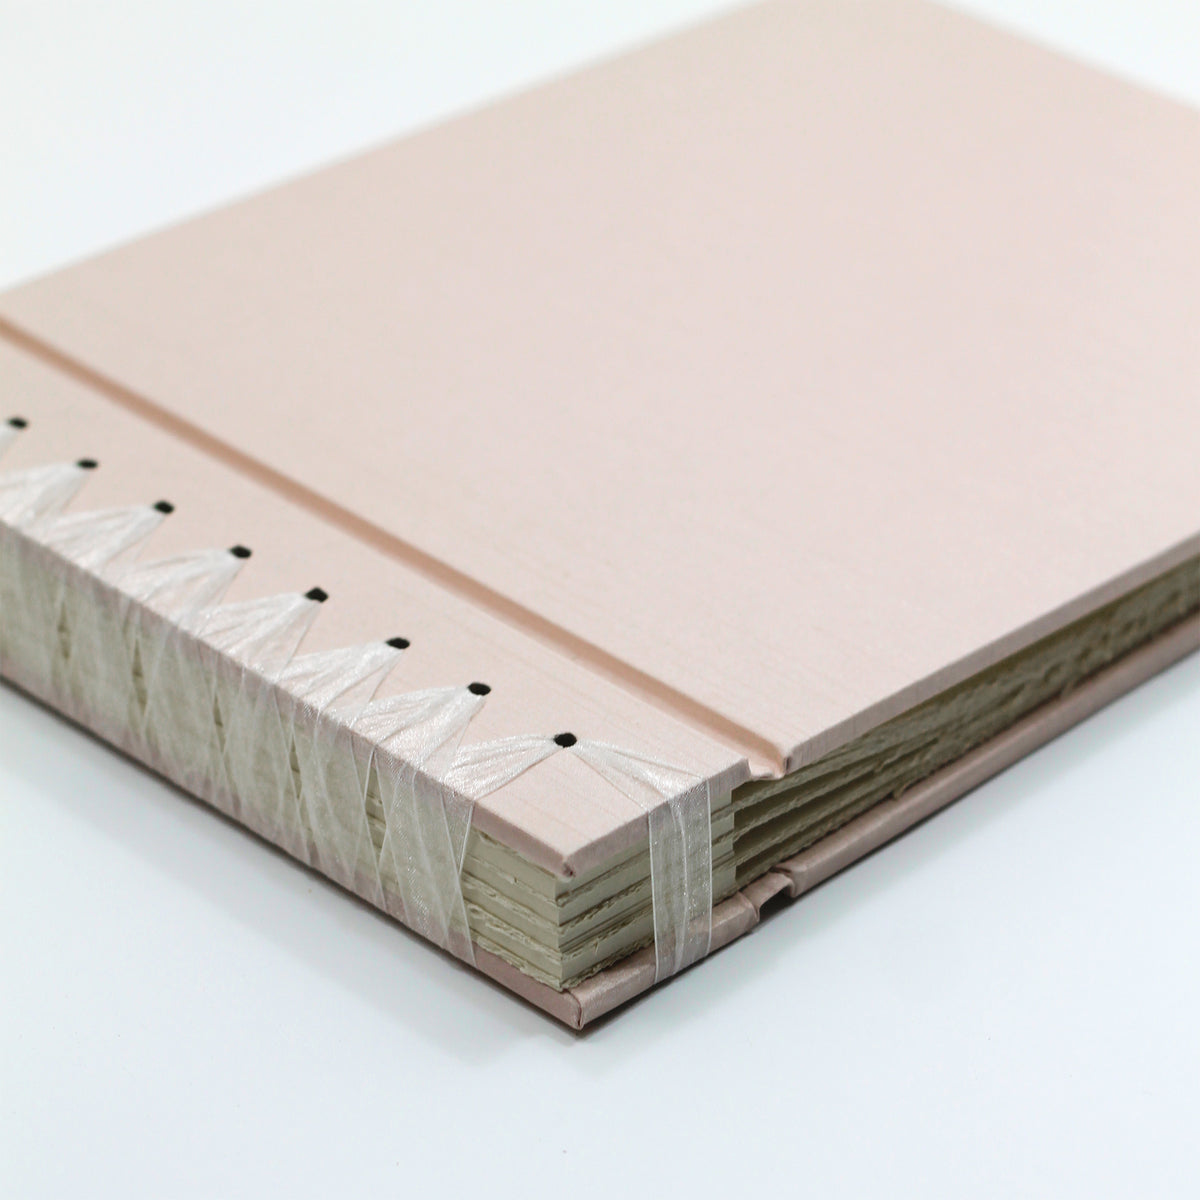 Deluxe 12 x 15 Paper Page Album | Cover: Blush Pink Silk | Available Personalized